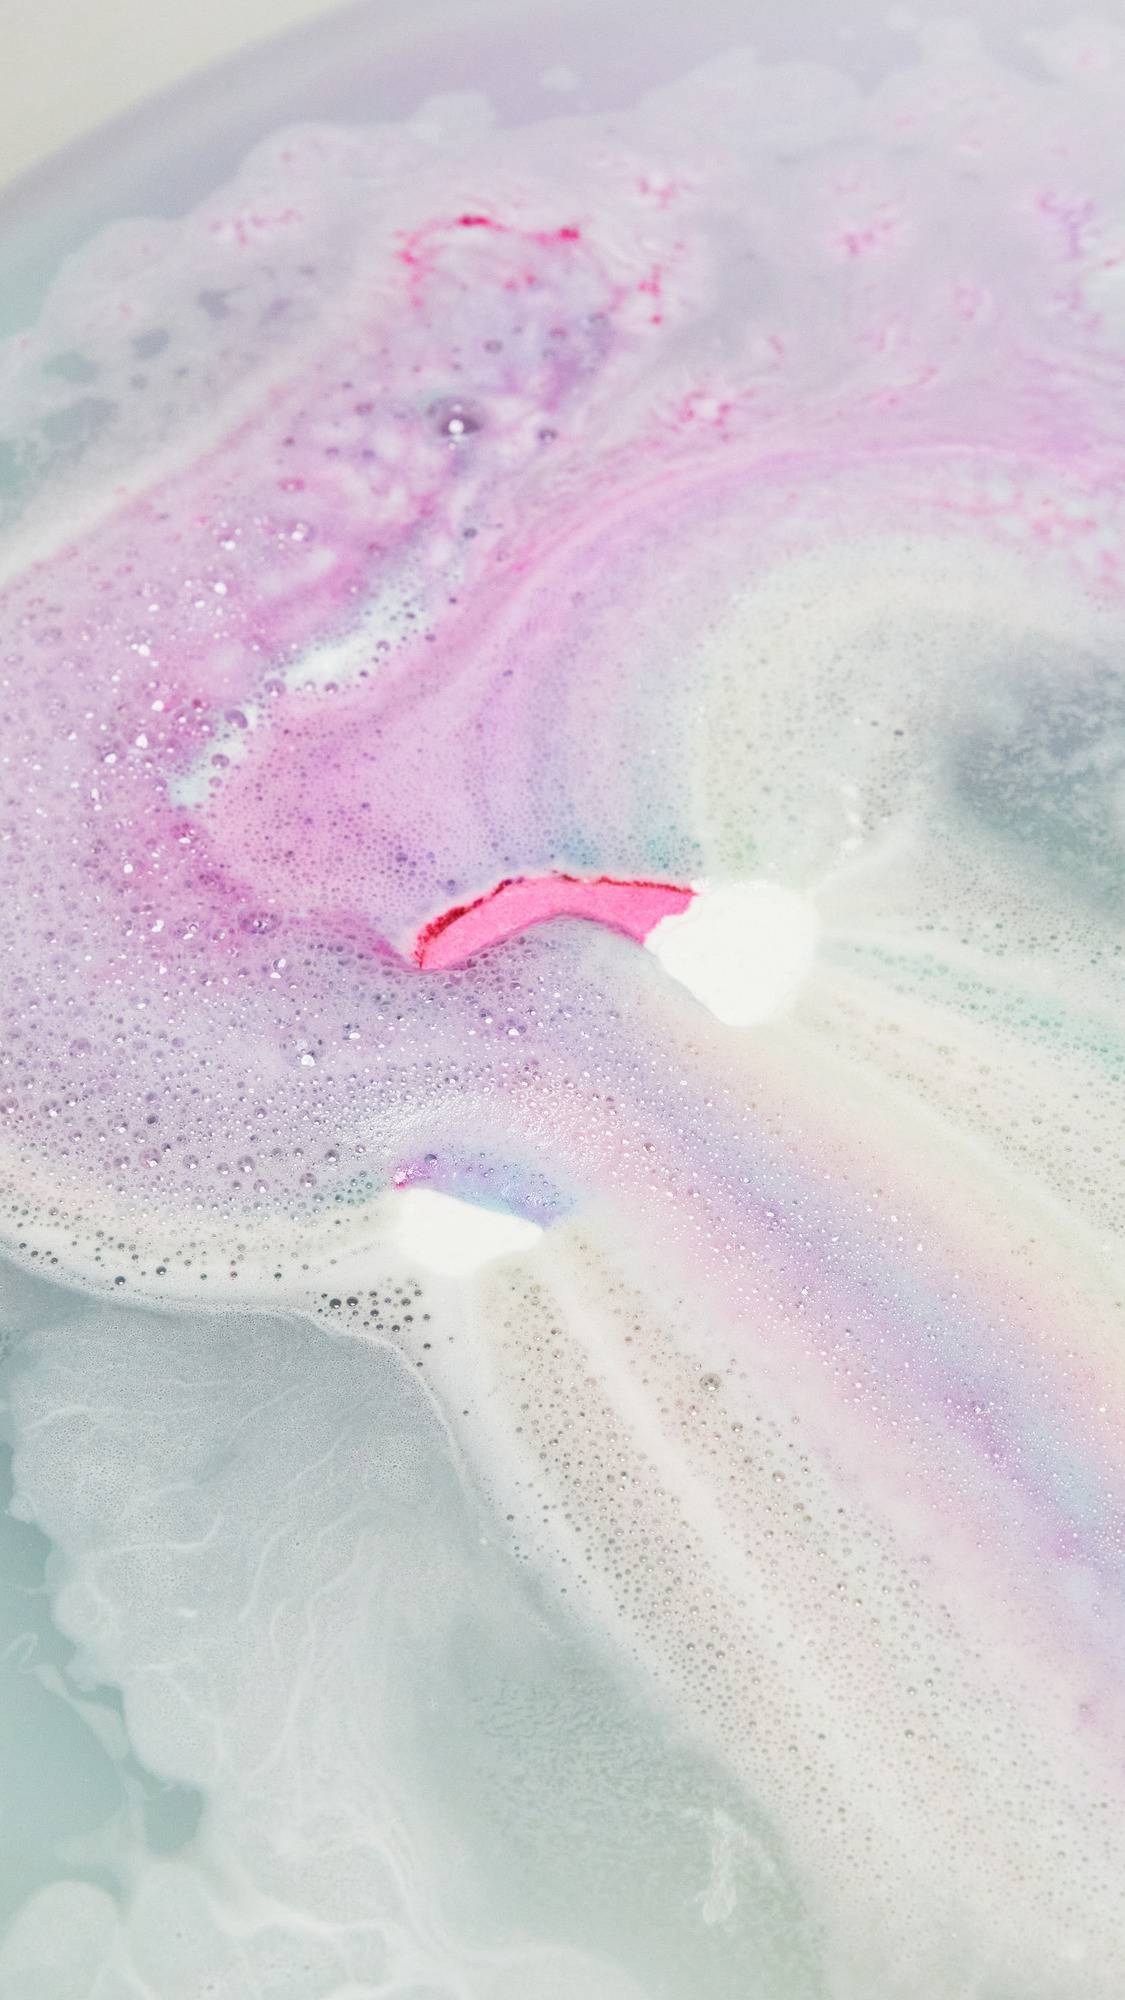 The Somewhere bath bomb is slowly dissolving leaving behind delicate, pink and blue pastel waters with thin velvety foam. 